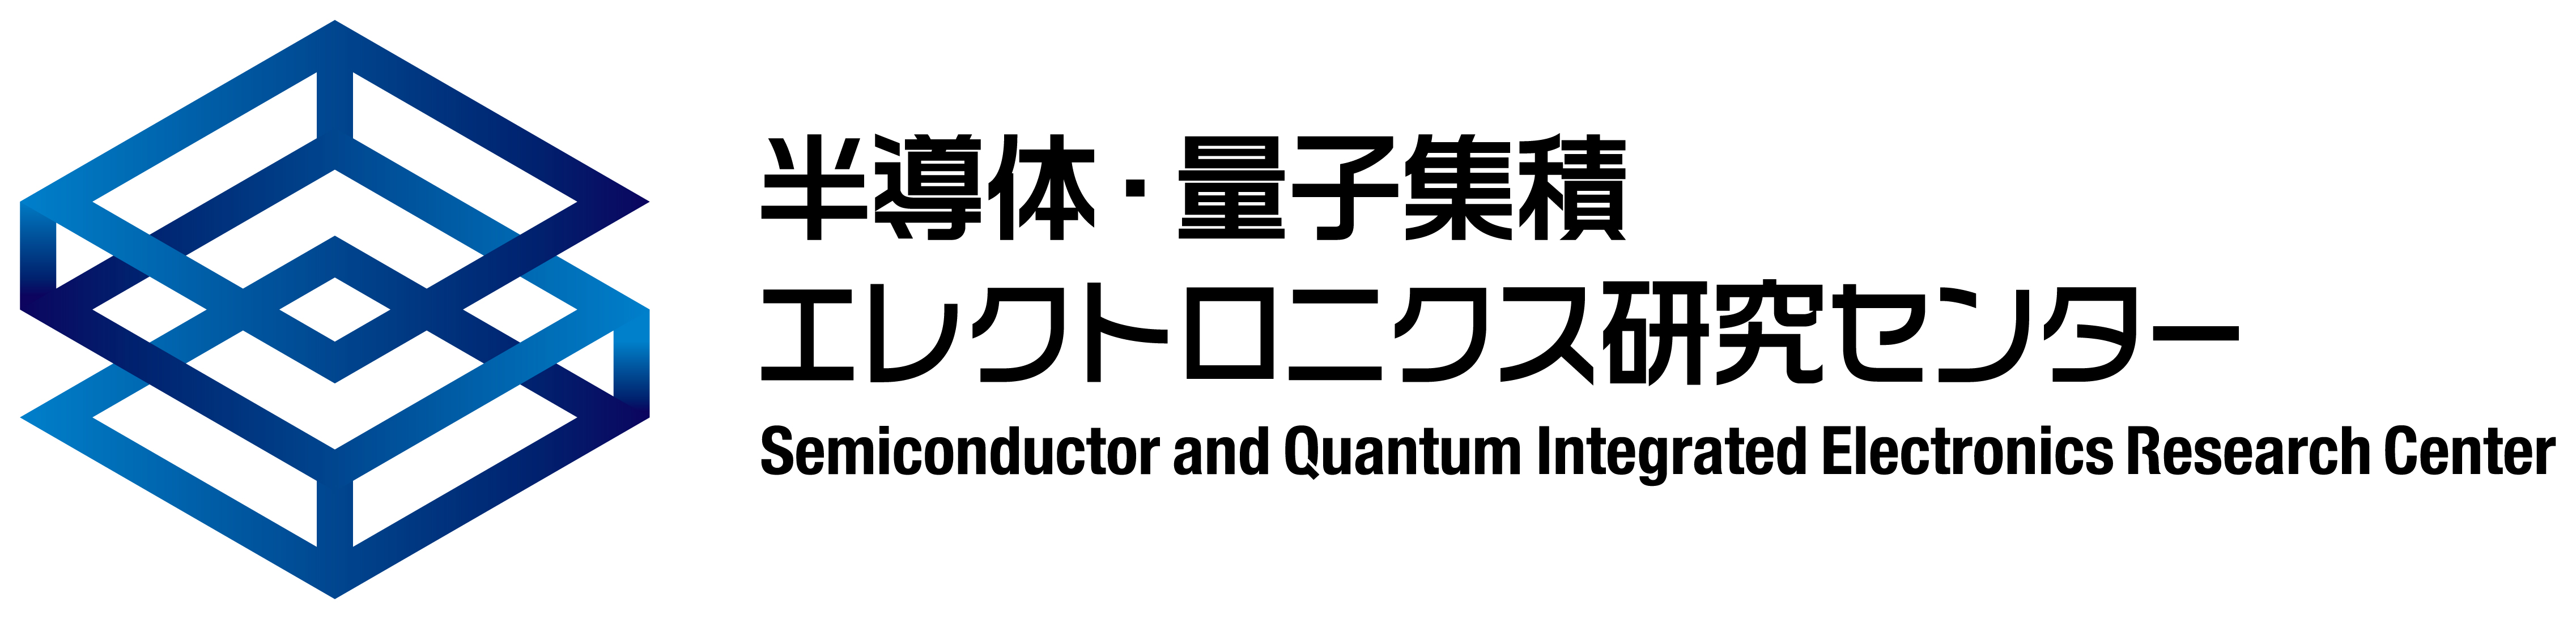 Semiconductor and Quantum Integrated Electronics Research Center